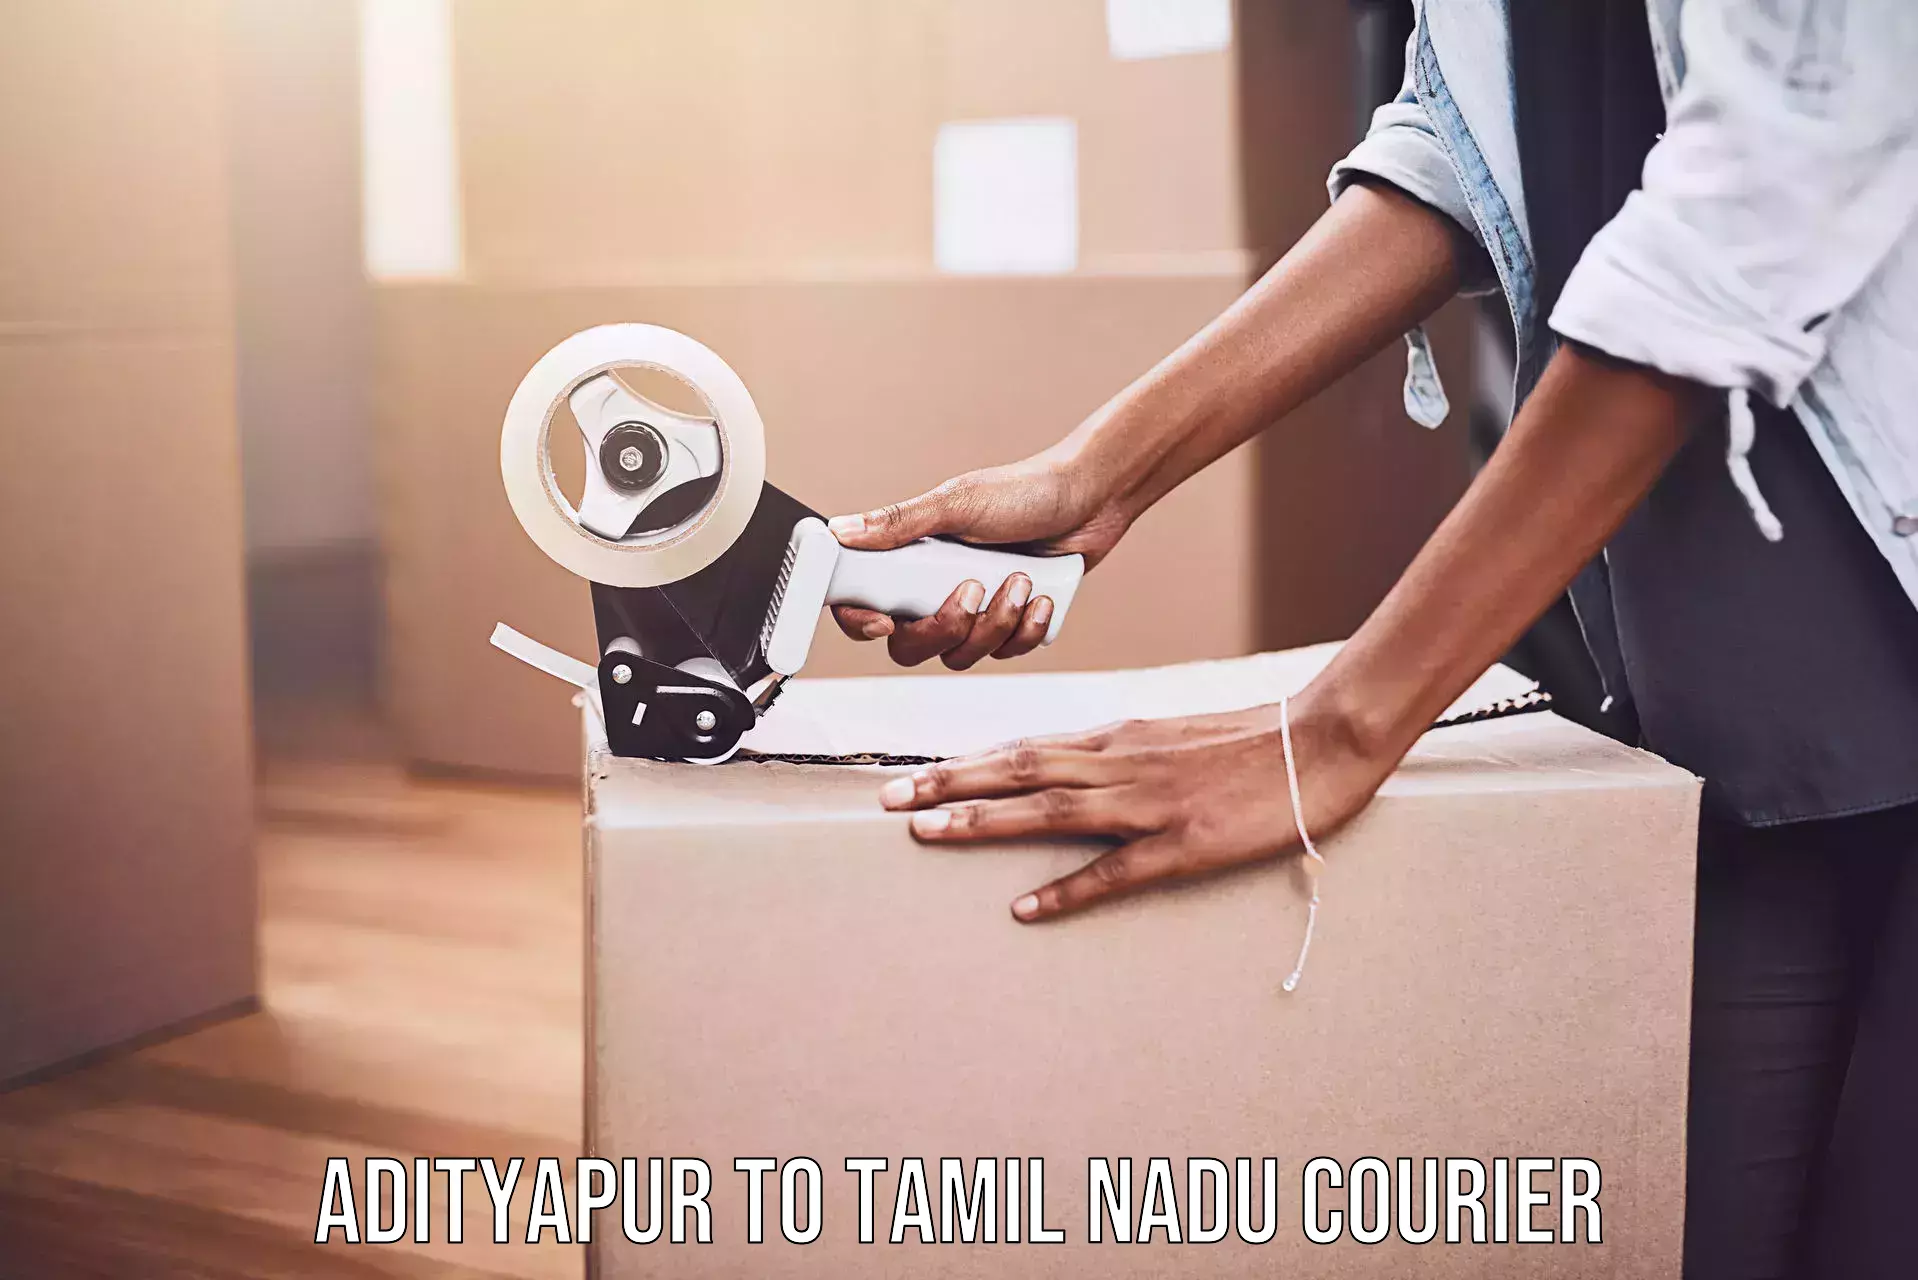 Reliable courier service Adityapur to Tamil Nadu